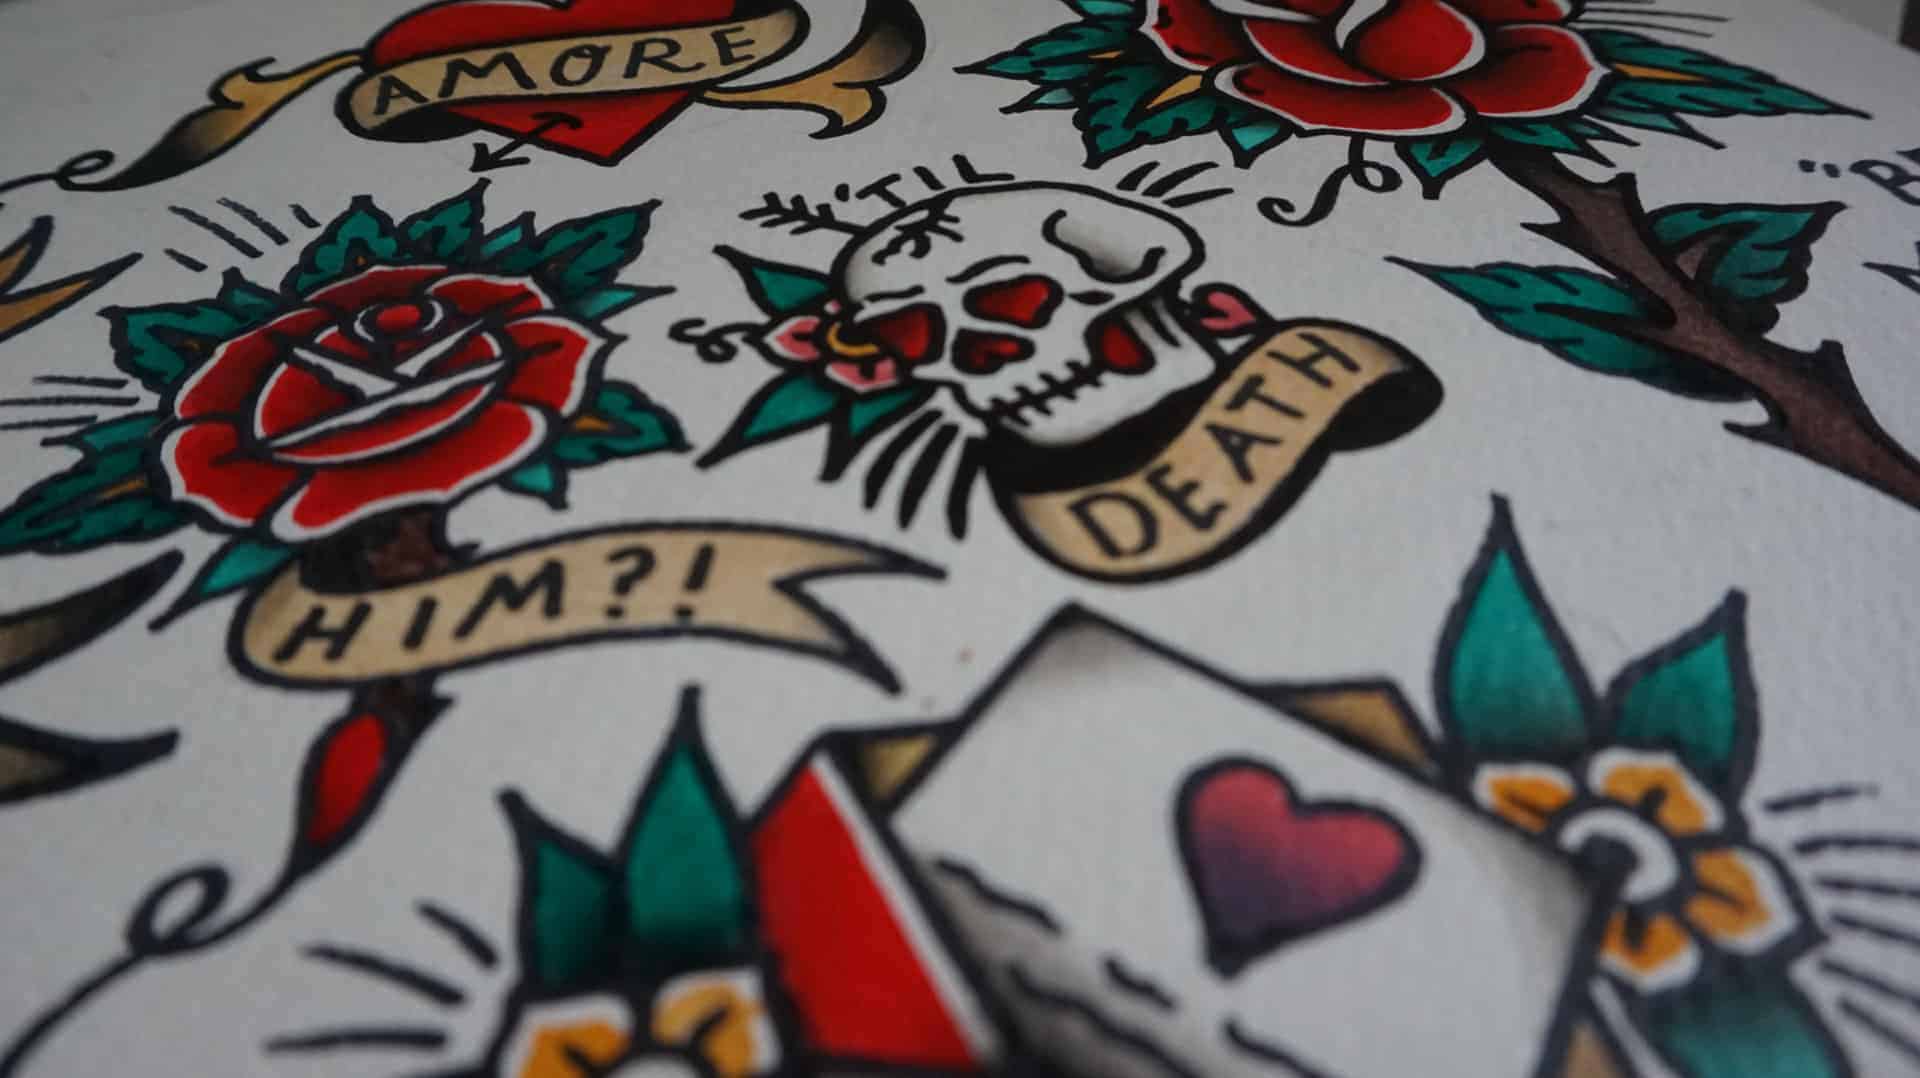 Tattoo flash designs with a skull, playing cards and some rosesa